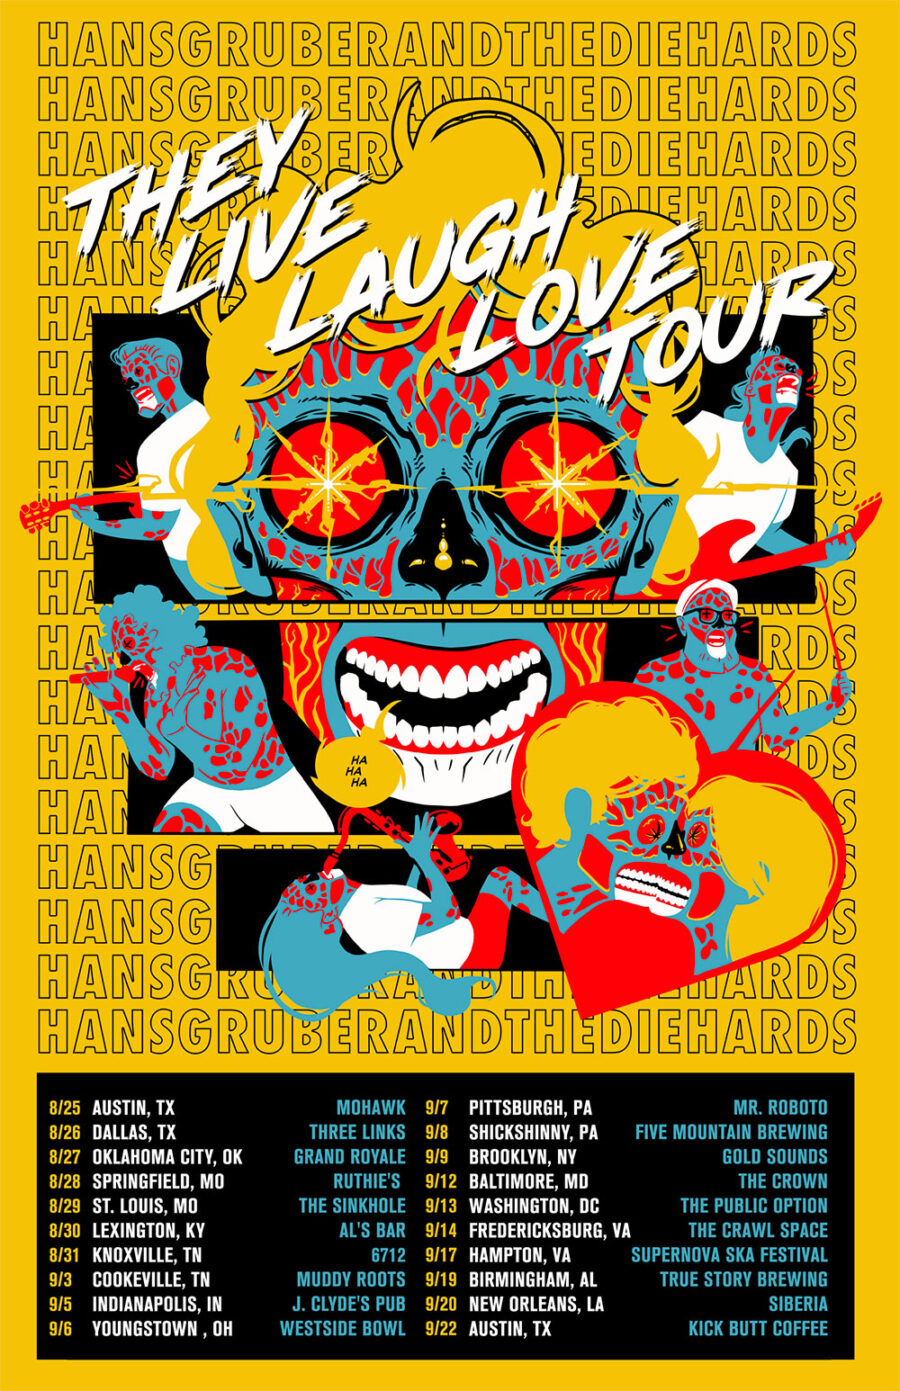 Hans Gruber and the Die Hards Announce They Live Laugh Love Tour